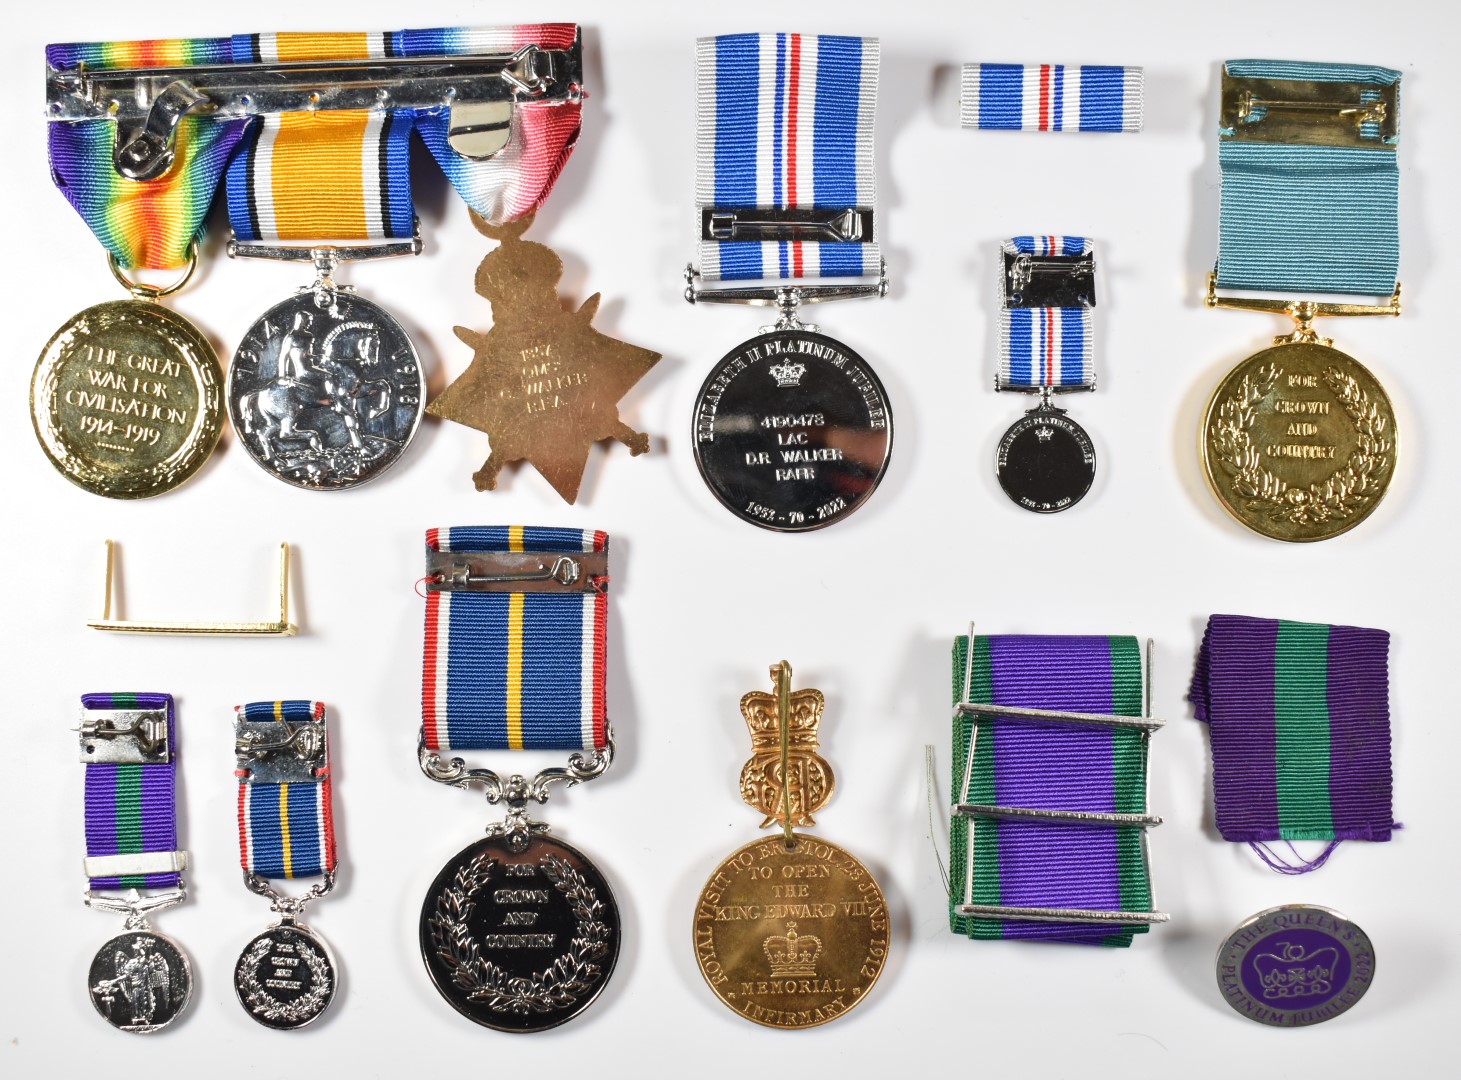 British Army WW1 replacement medals comprising 1914 Star, War Medal and Victory Medal, named to 1357 - Image 2 of 5